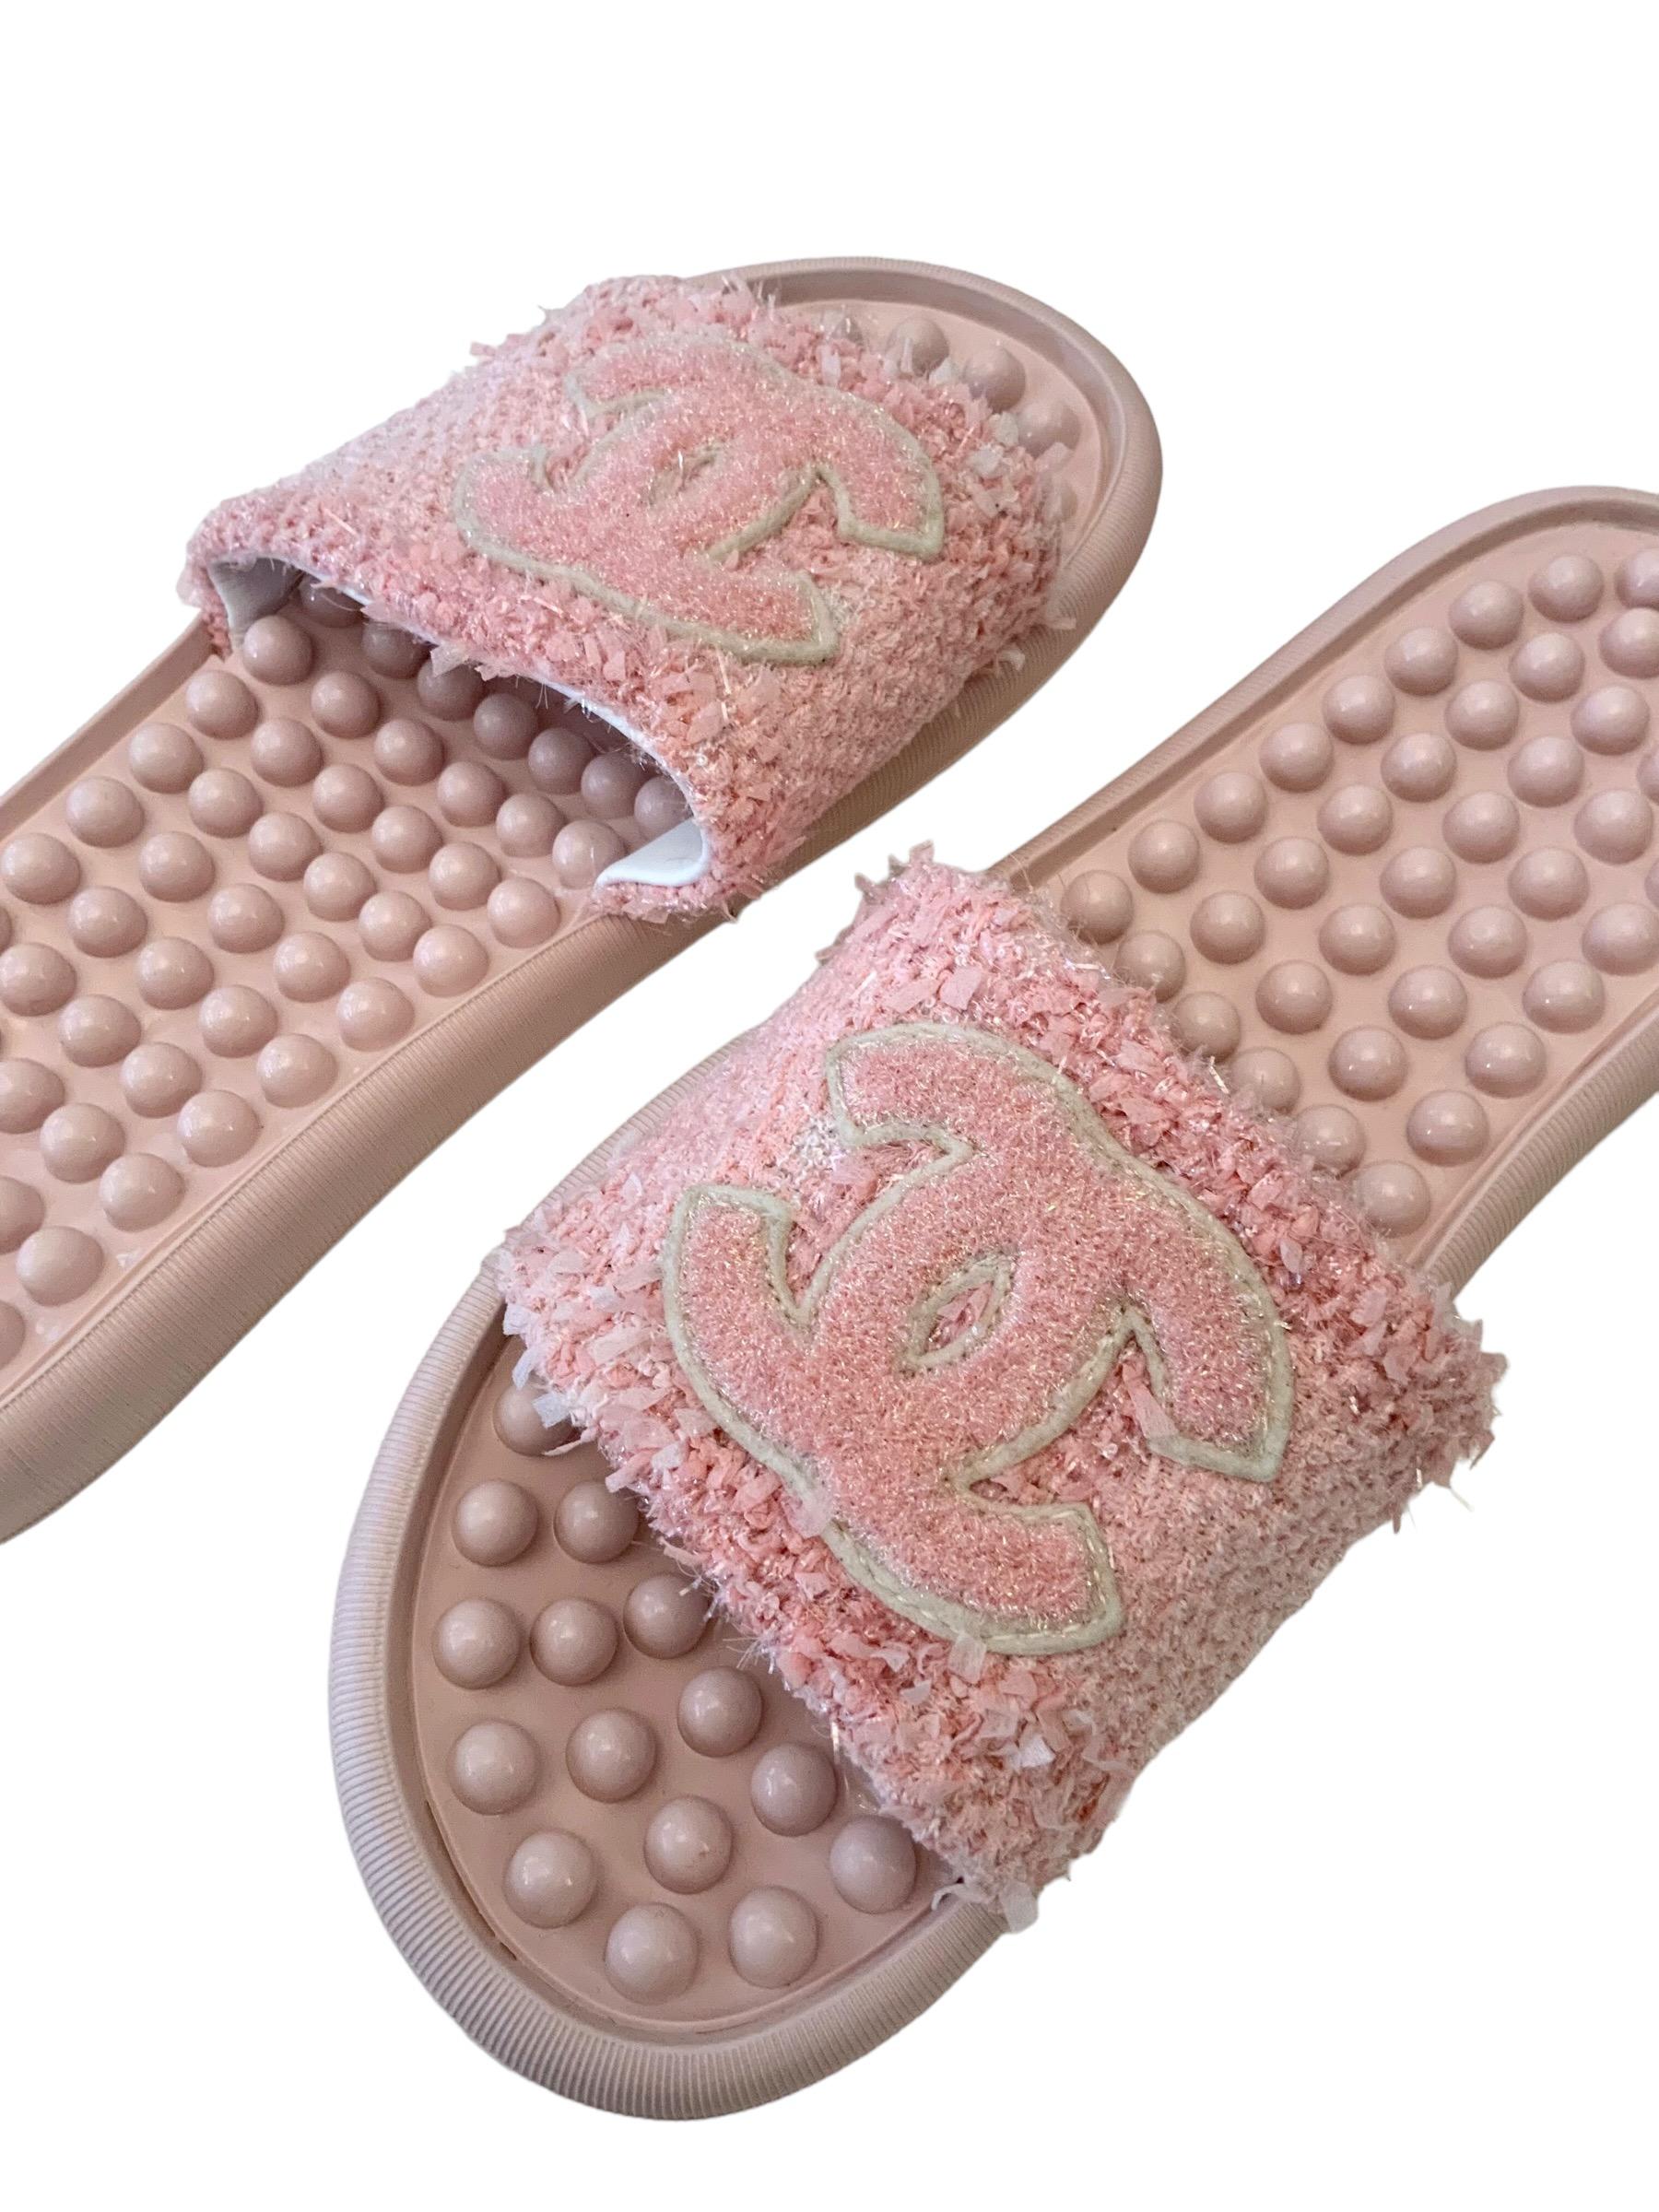 Great slides from the 2018 Spring Summer collection.
Crafted in a pink / coral tweed with a gold thread woven throughout.
It features a CC logo on top and the inside sole is made of small rubber balls to make a great comfort while walking.
To use at